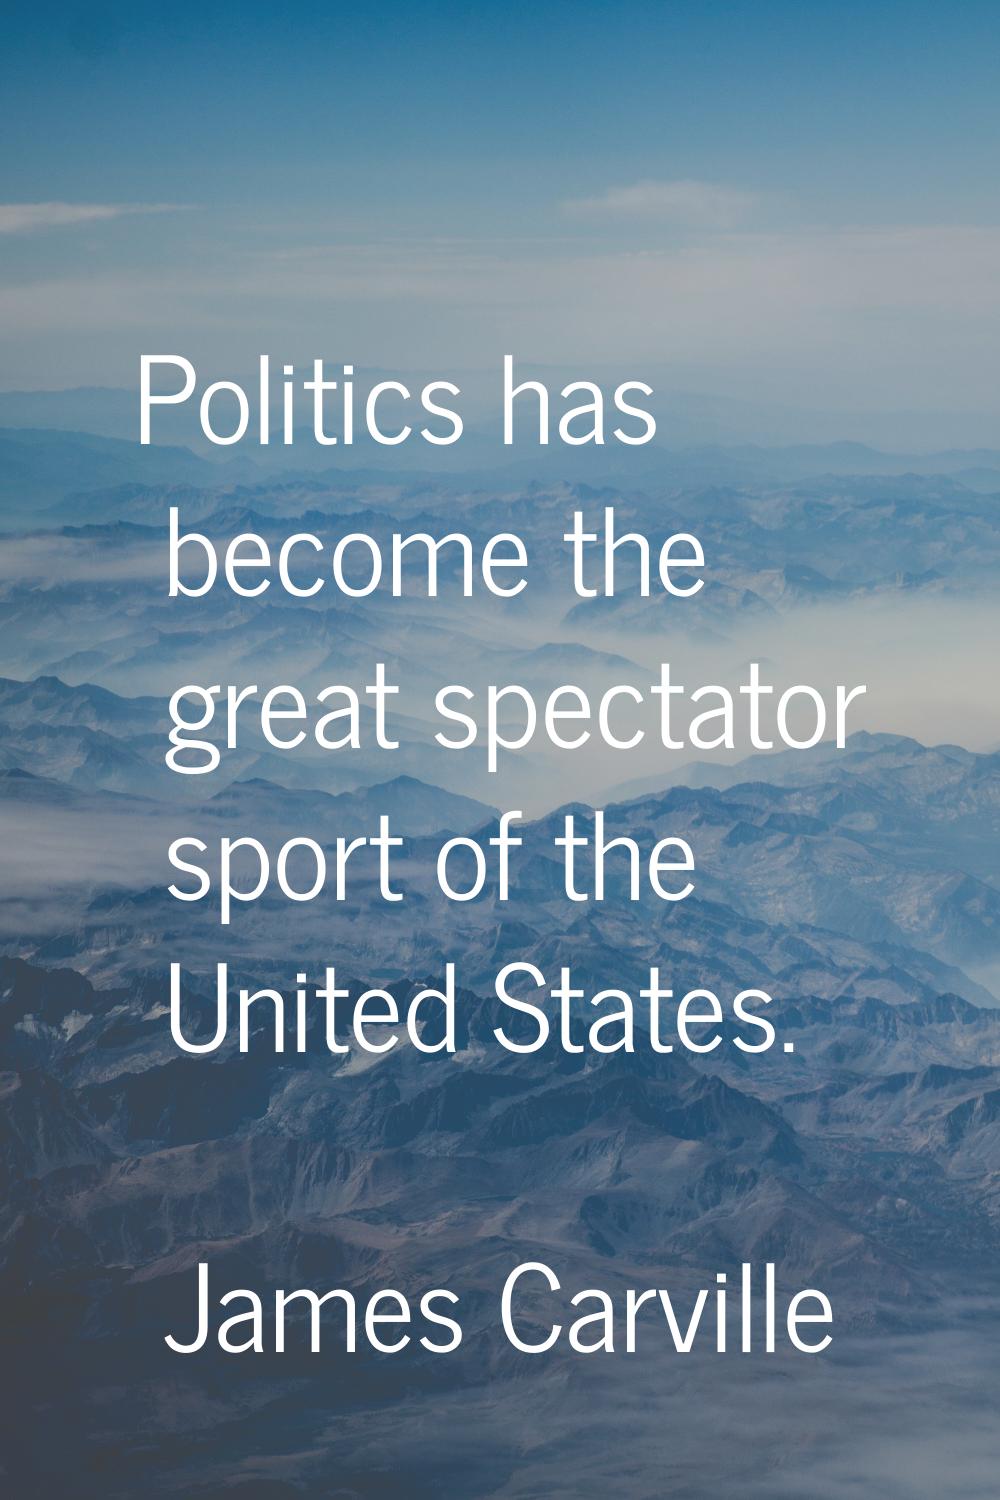 Politics has become the great spectator sport of the United States.